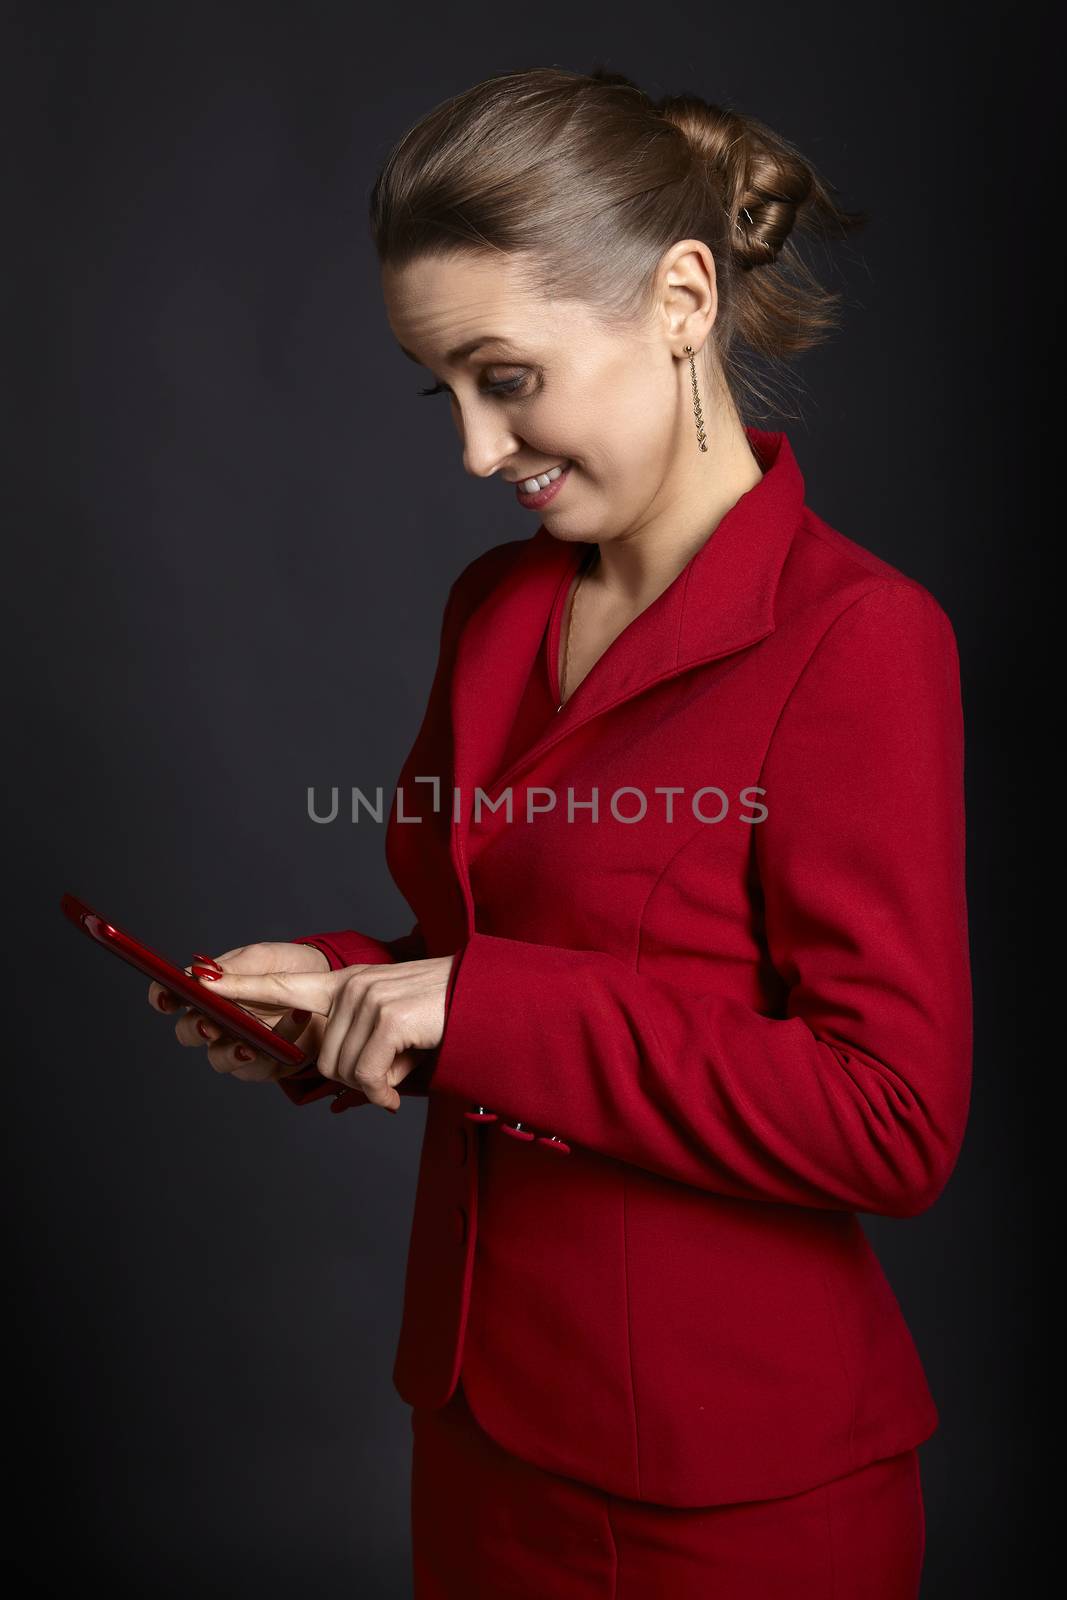 Studio shot of elegant young businesswoman using cell phone on black background.